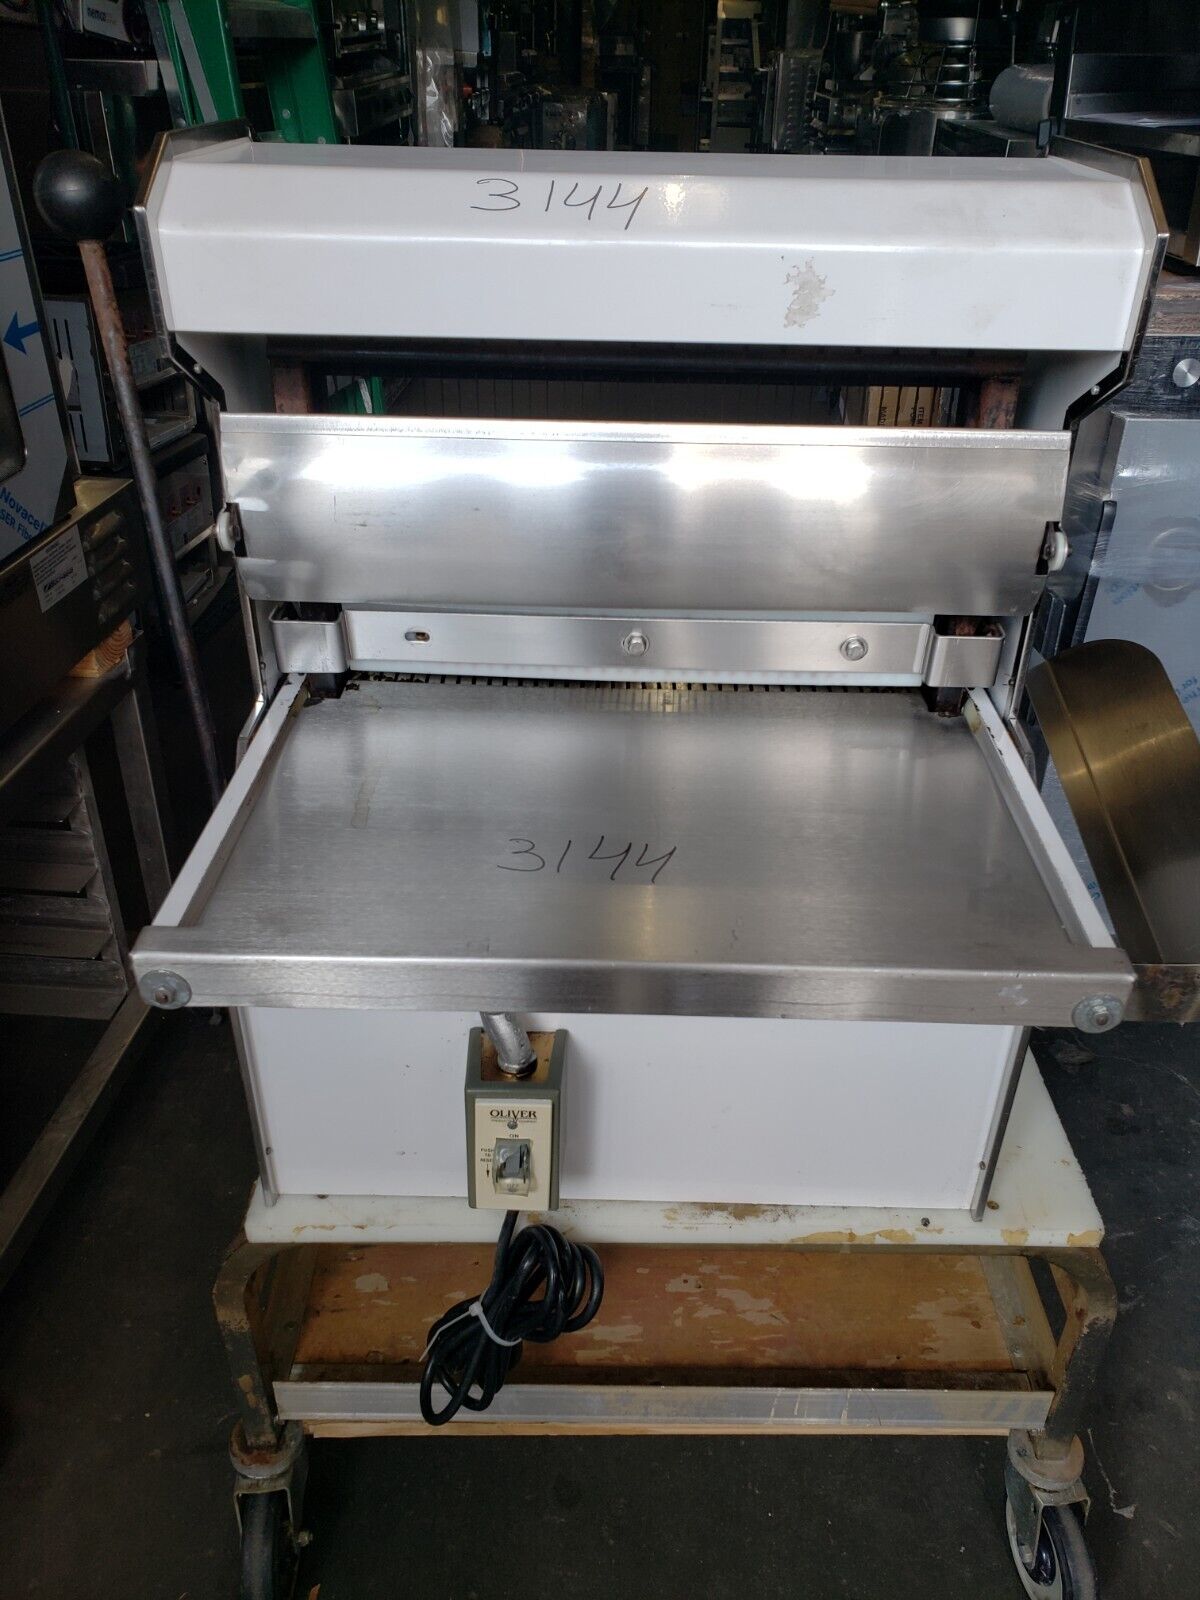 "oliver 777" Heavy Duty Commercial 1/3 Hp Free-standing ½" Bread Slicer Machine